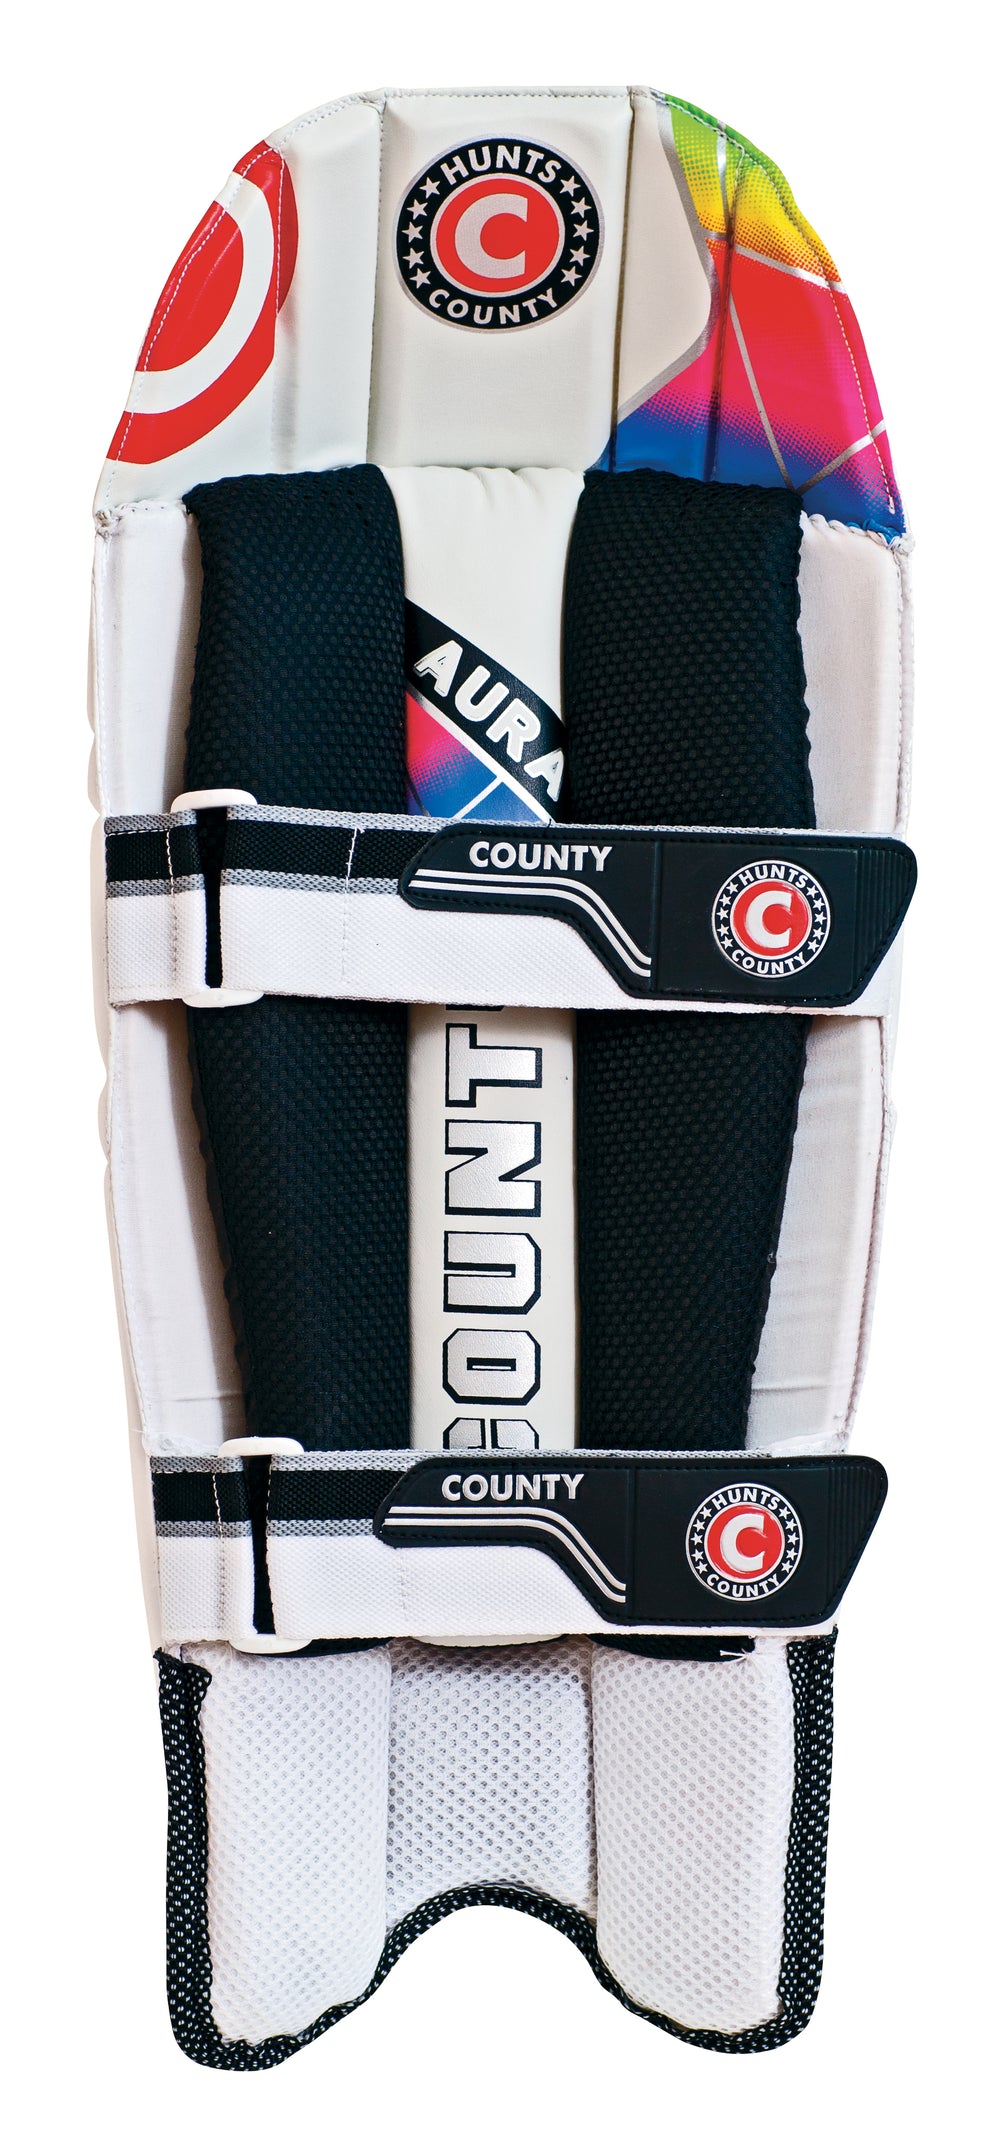 Hunts County Aura Wicket Keeping Pads